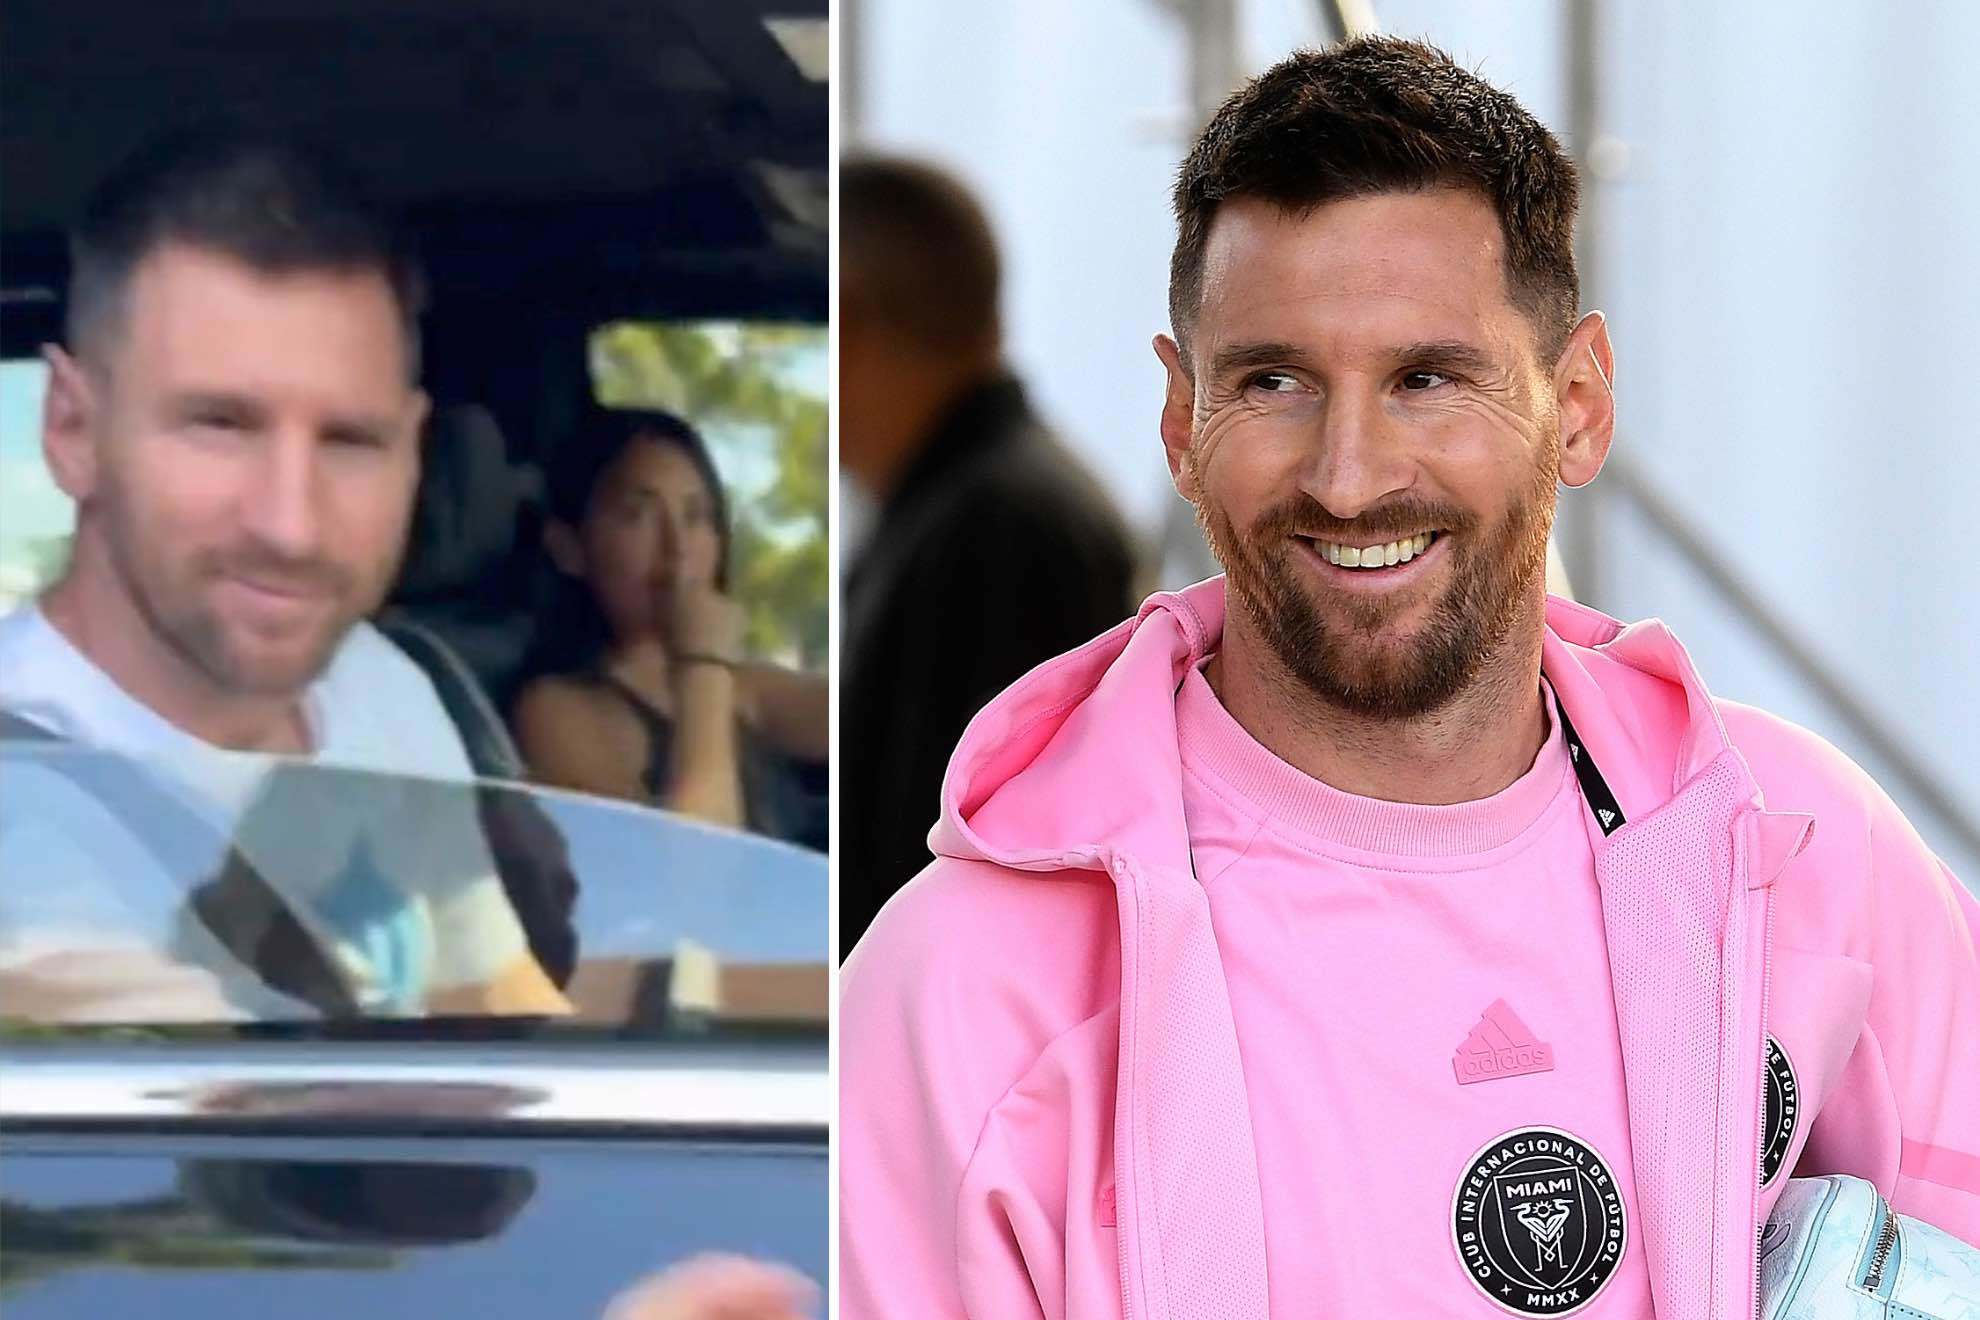 Leo Messi made a special memory for a fan and the video spread online